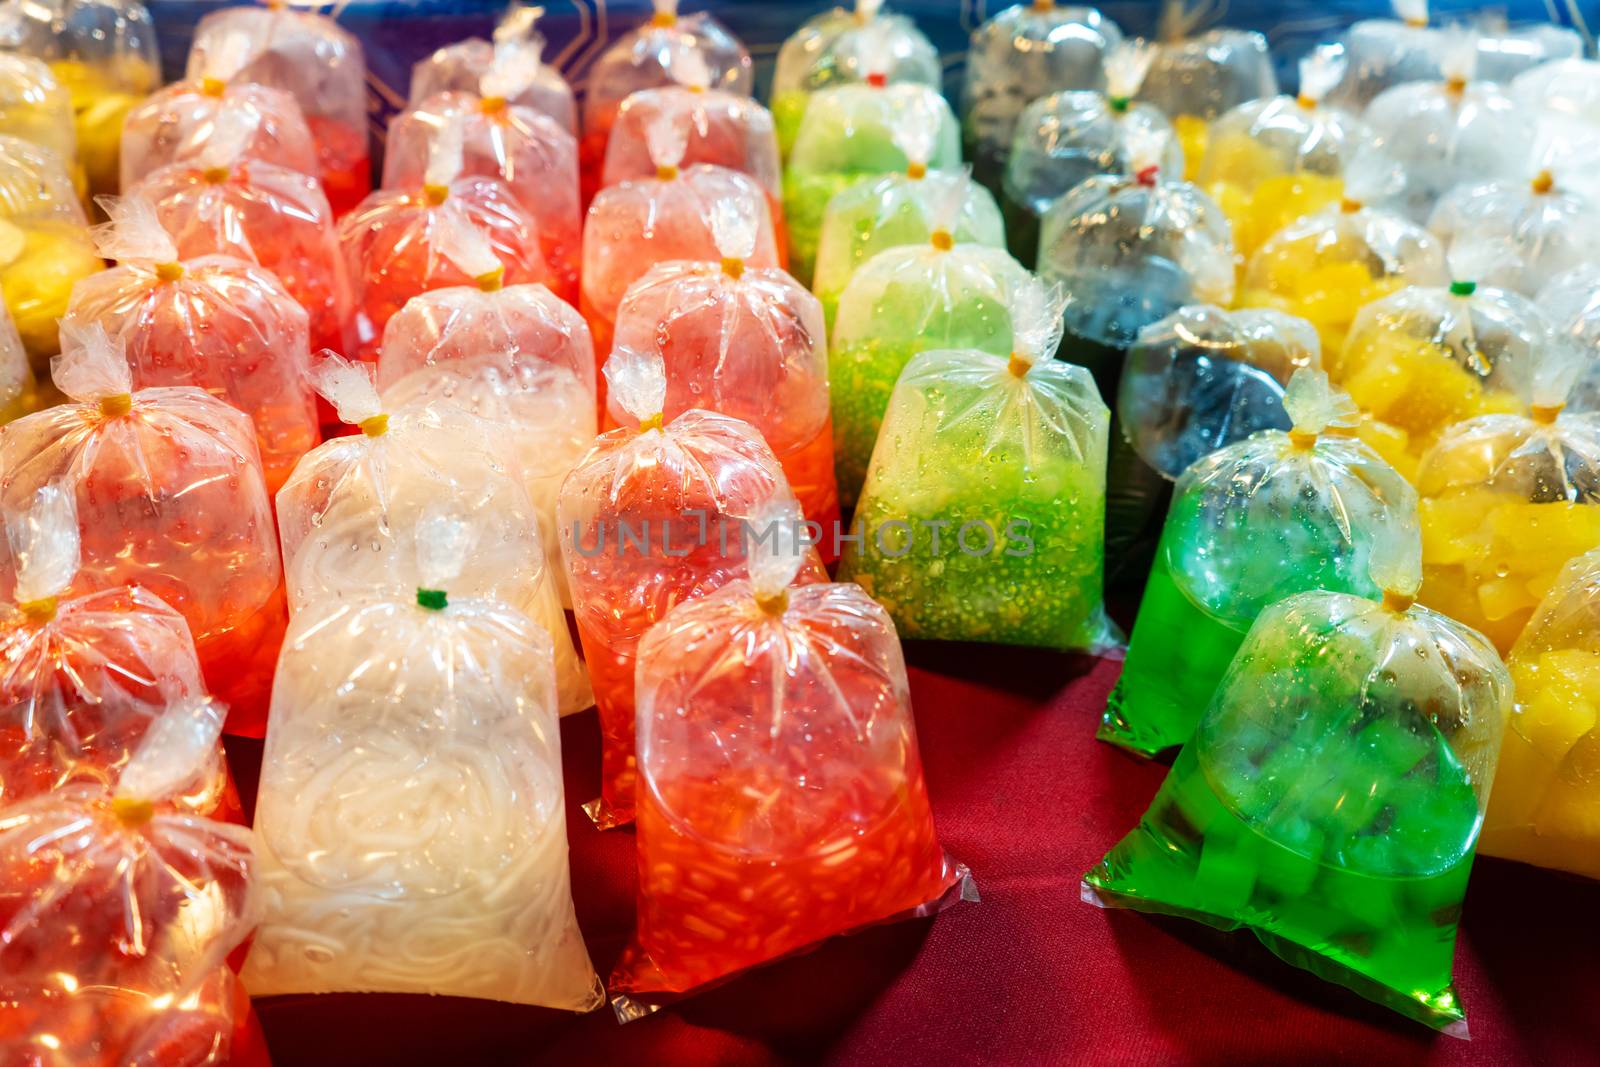 Colored desserts in plastic bags at a street food market in Asia. Unusual Asian food